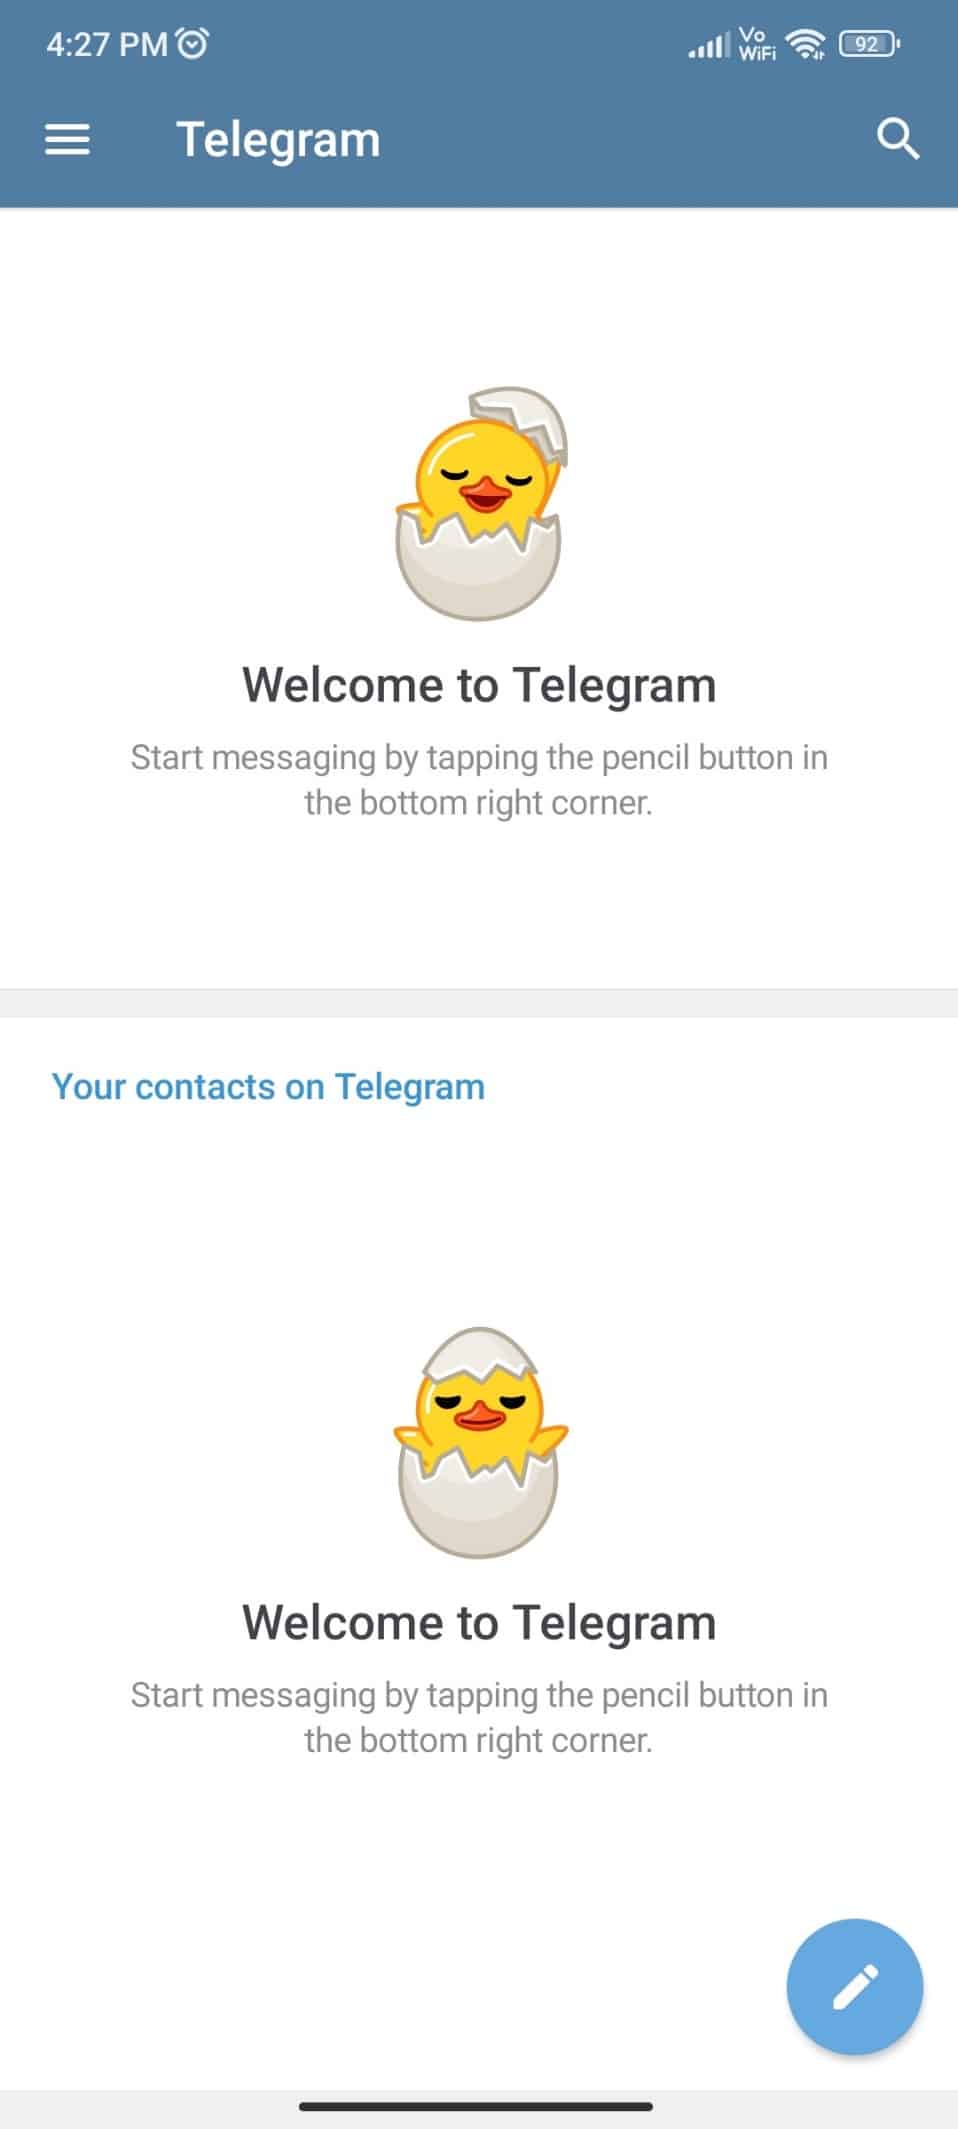 You will see the welcome message on the Telegram app 